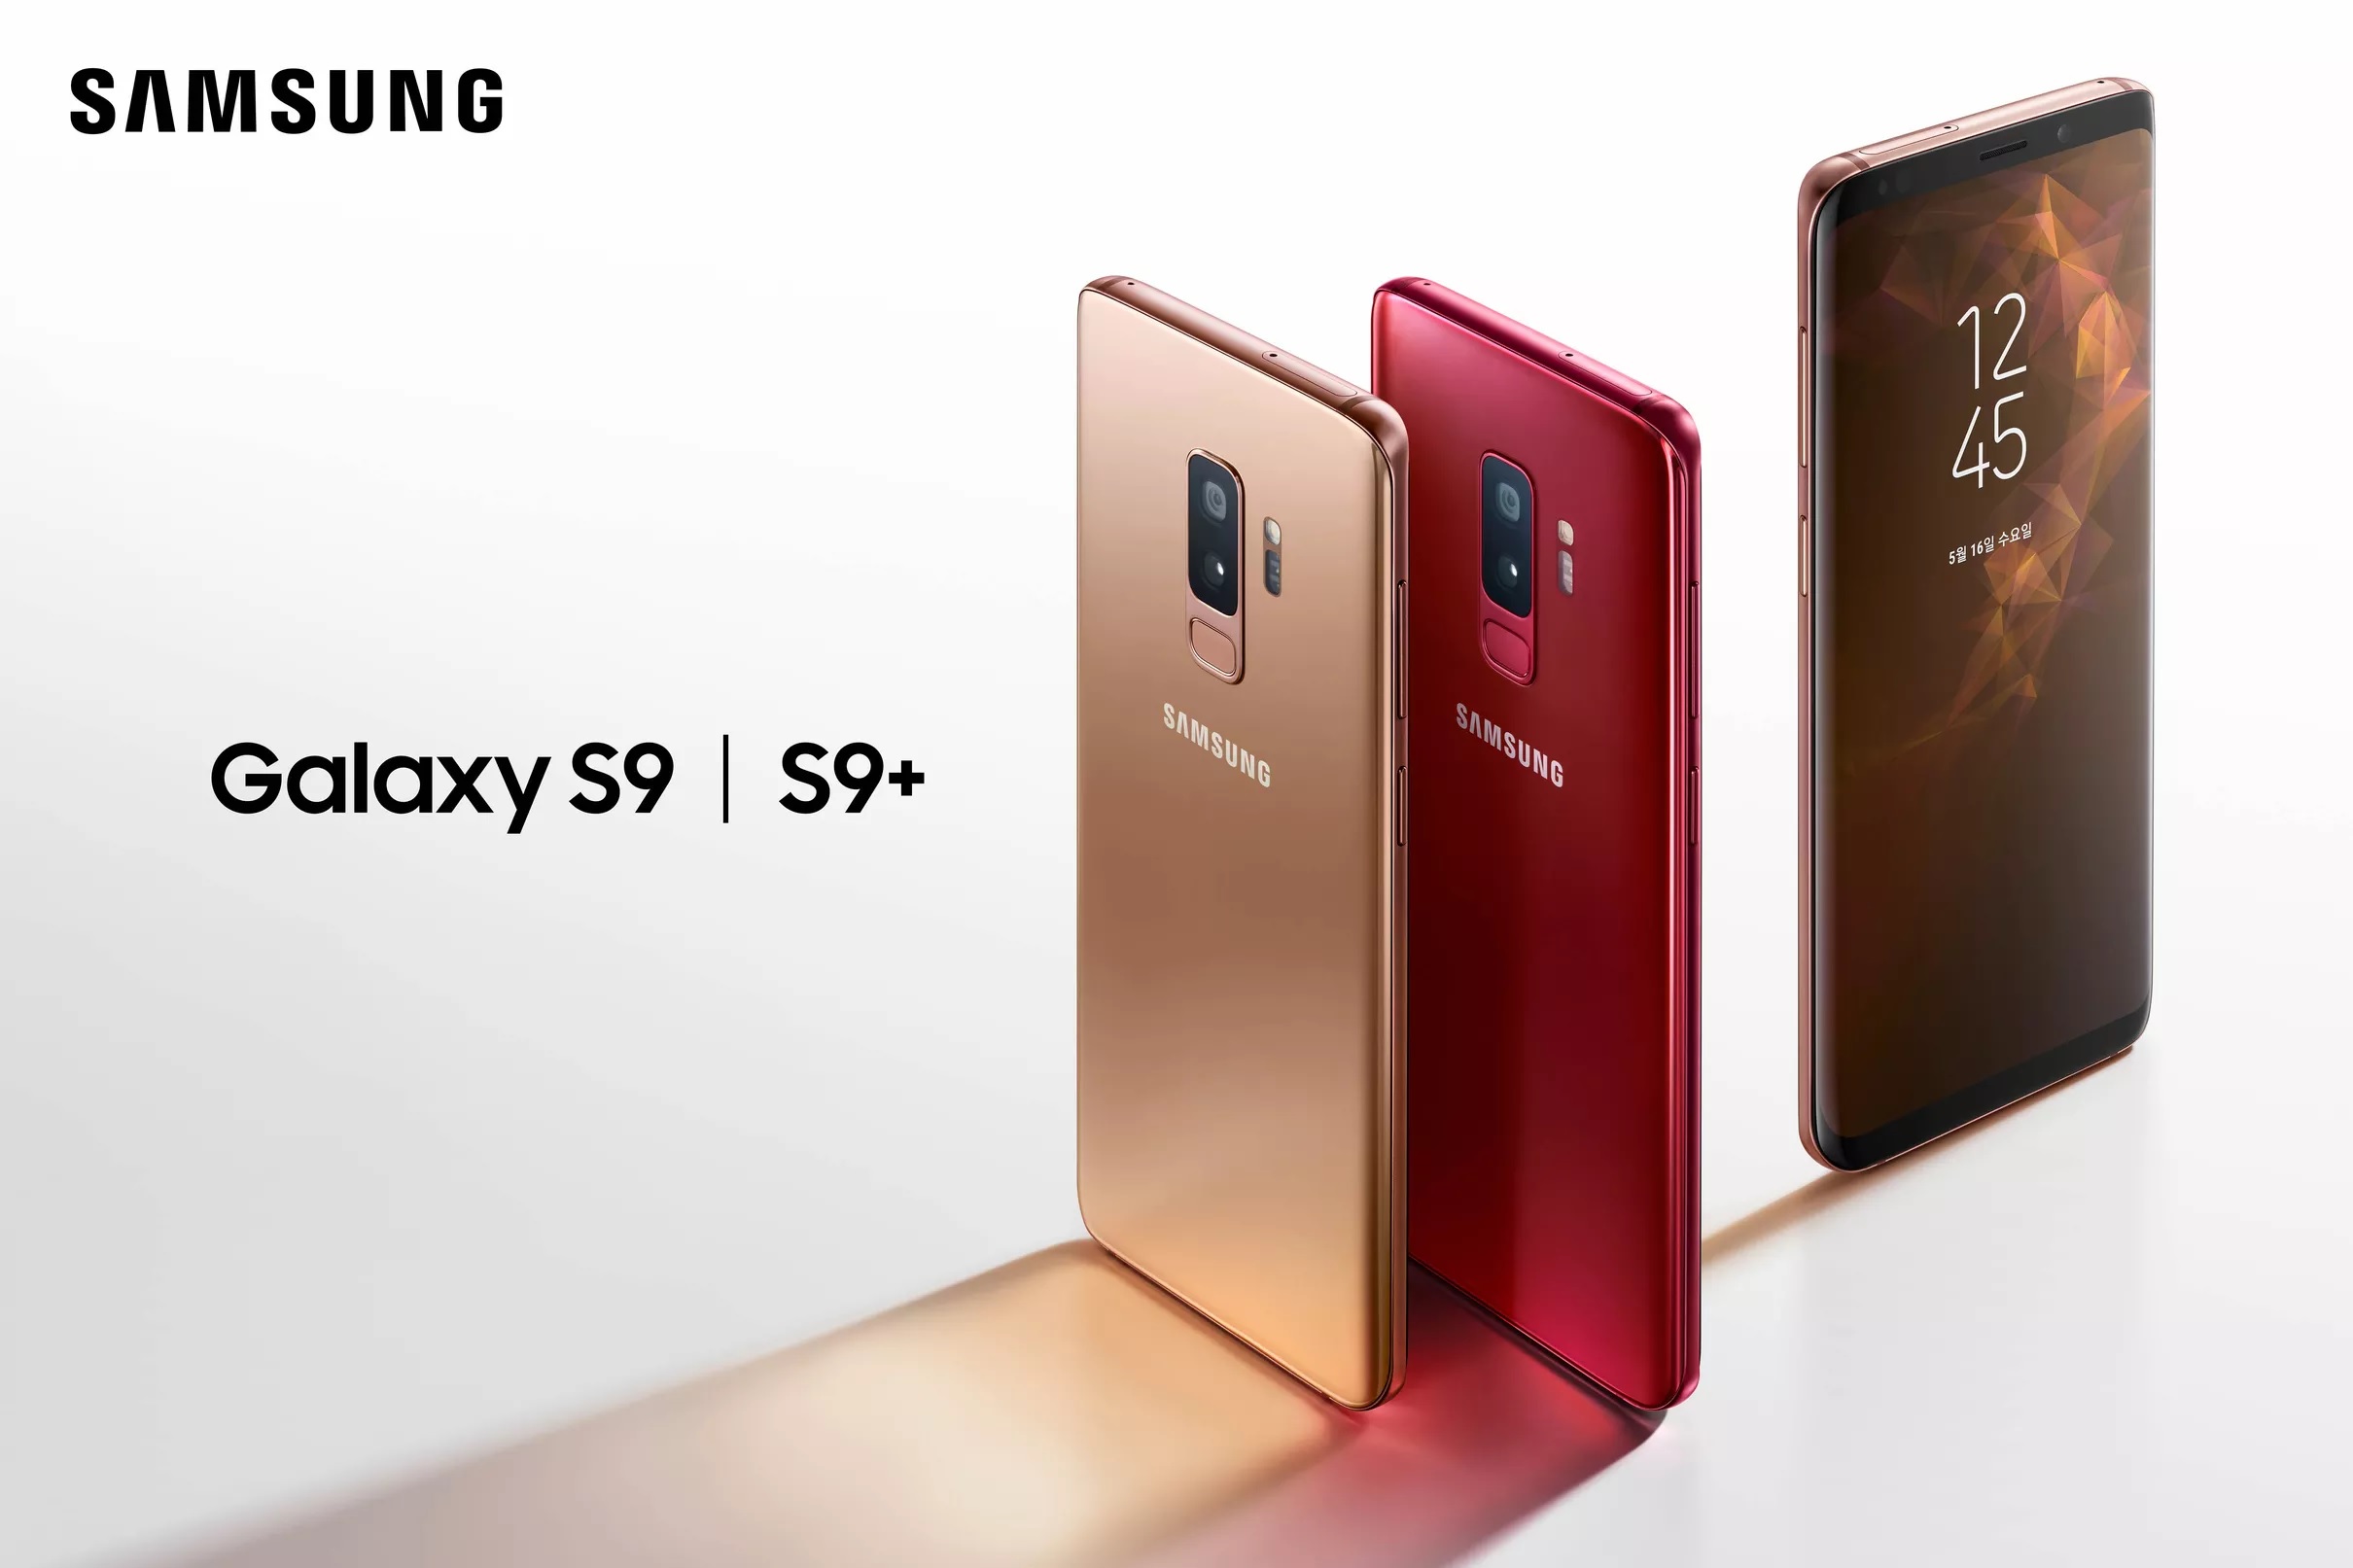 Samsung Galaxy S9 in gold and red